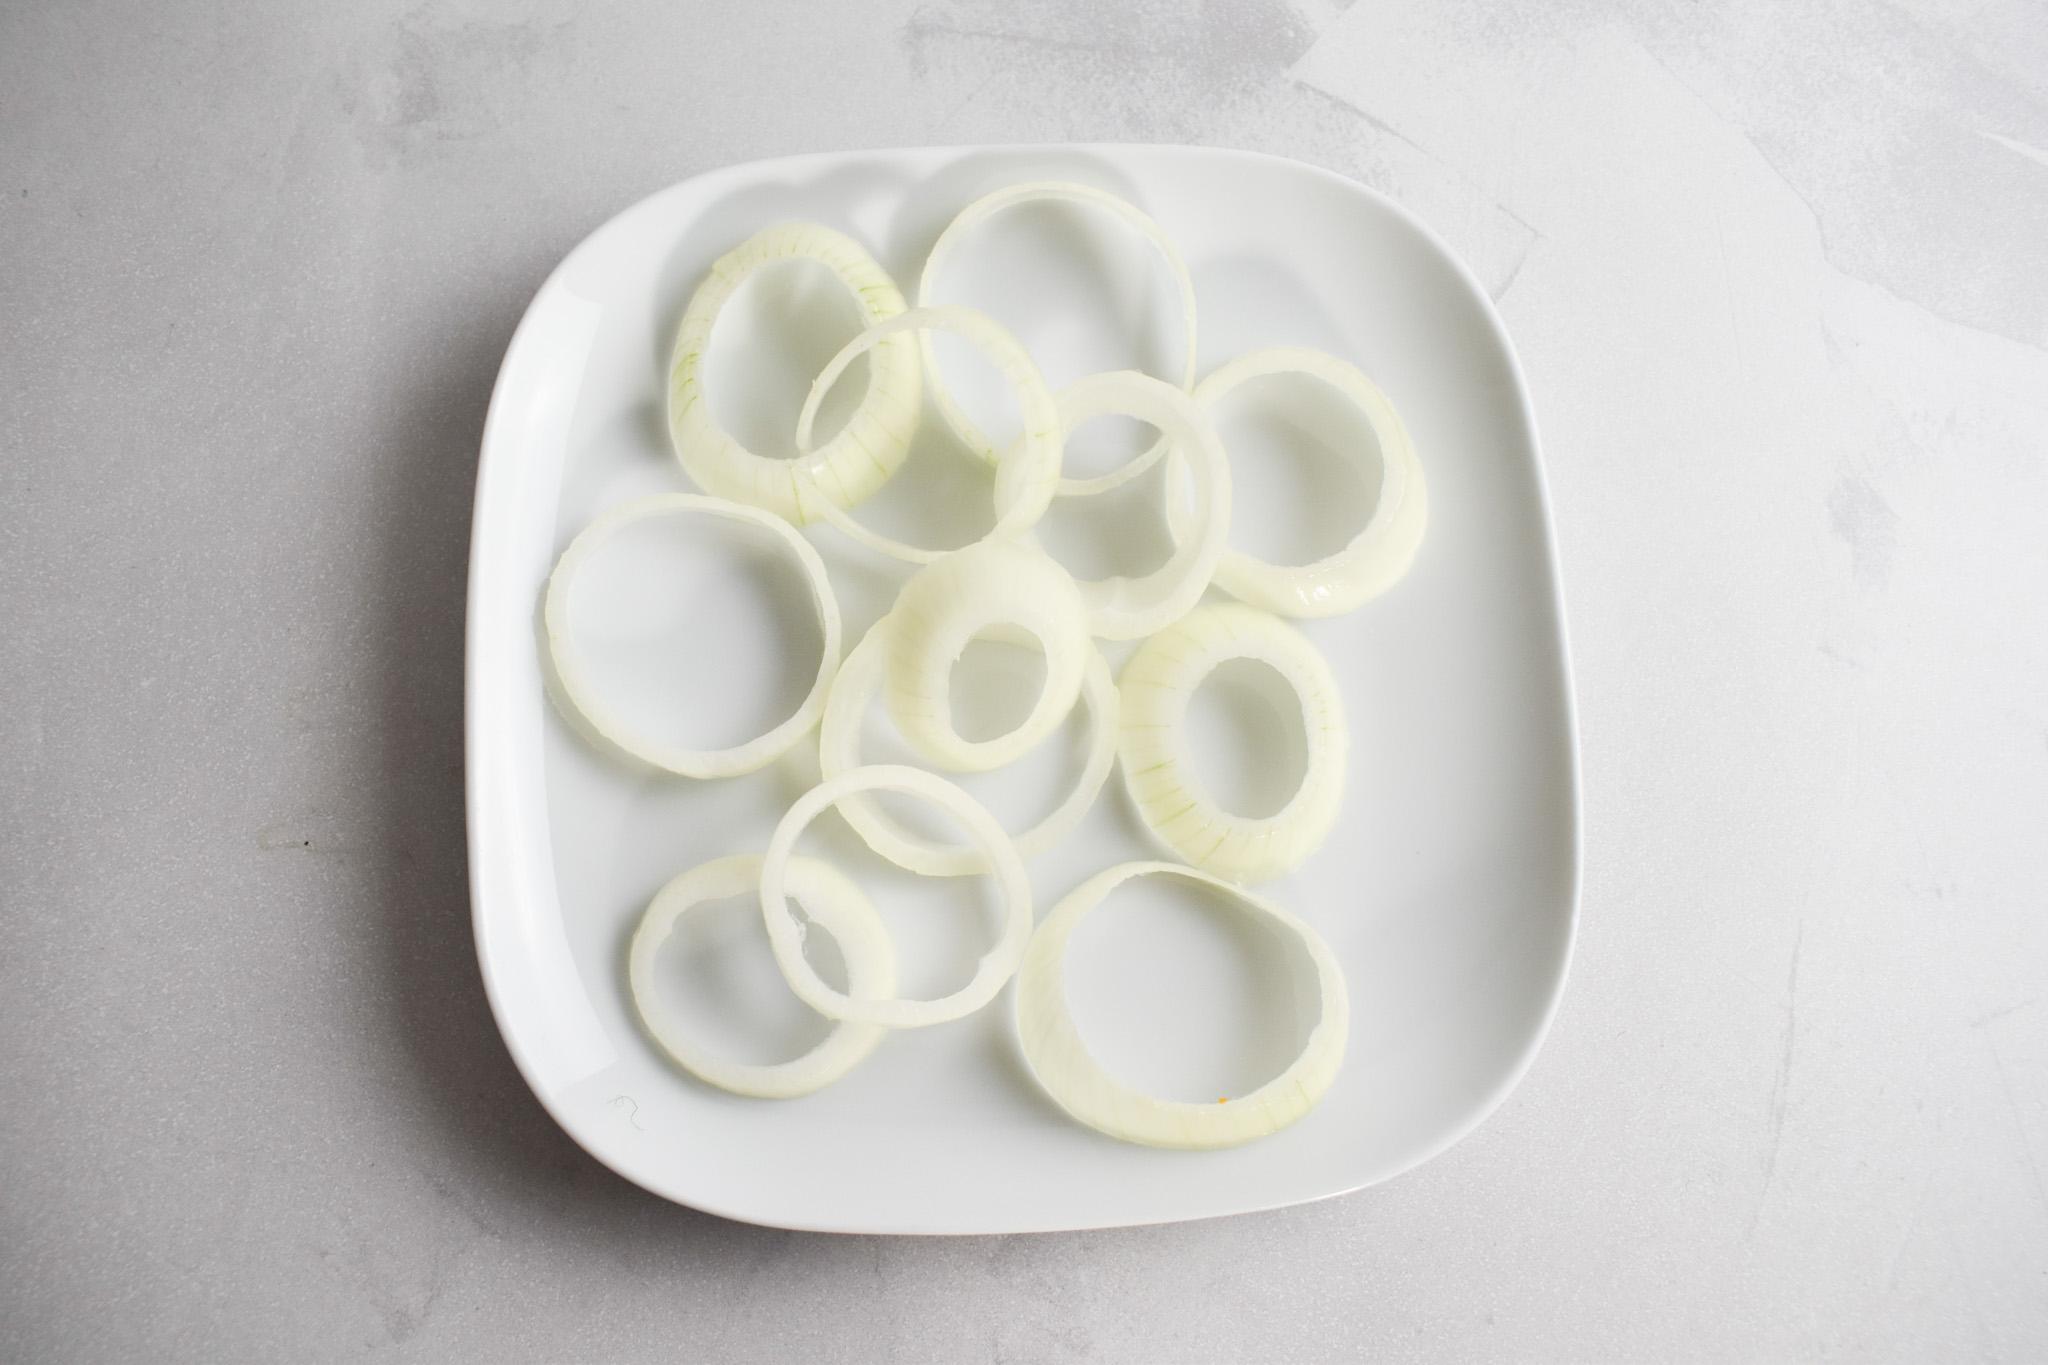 Onion slices on plate.